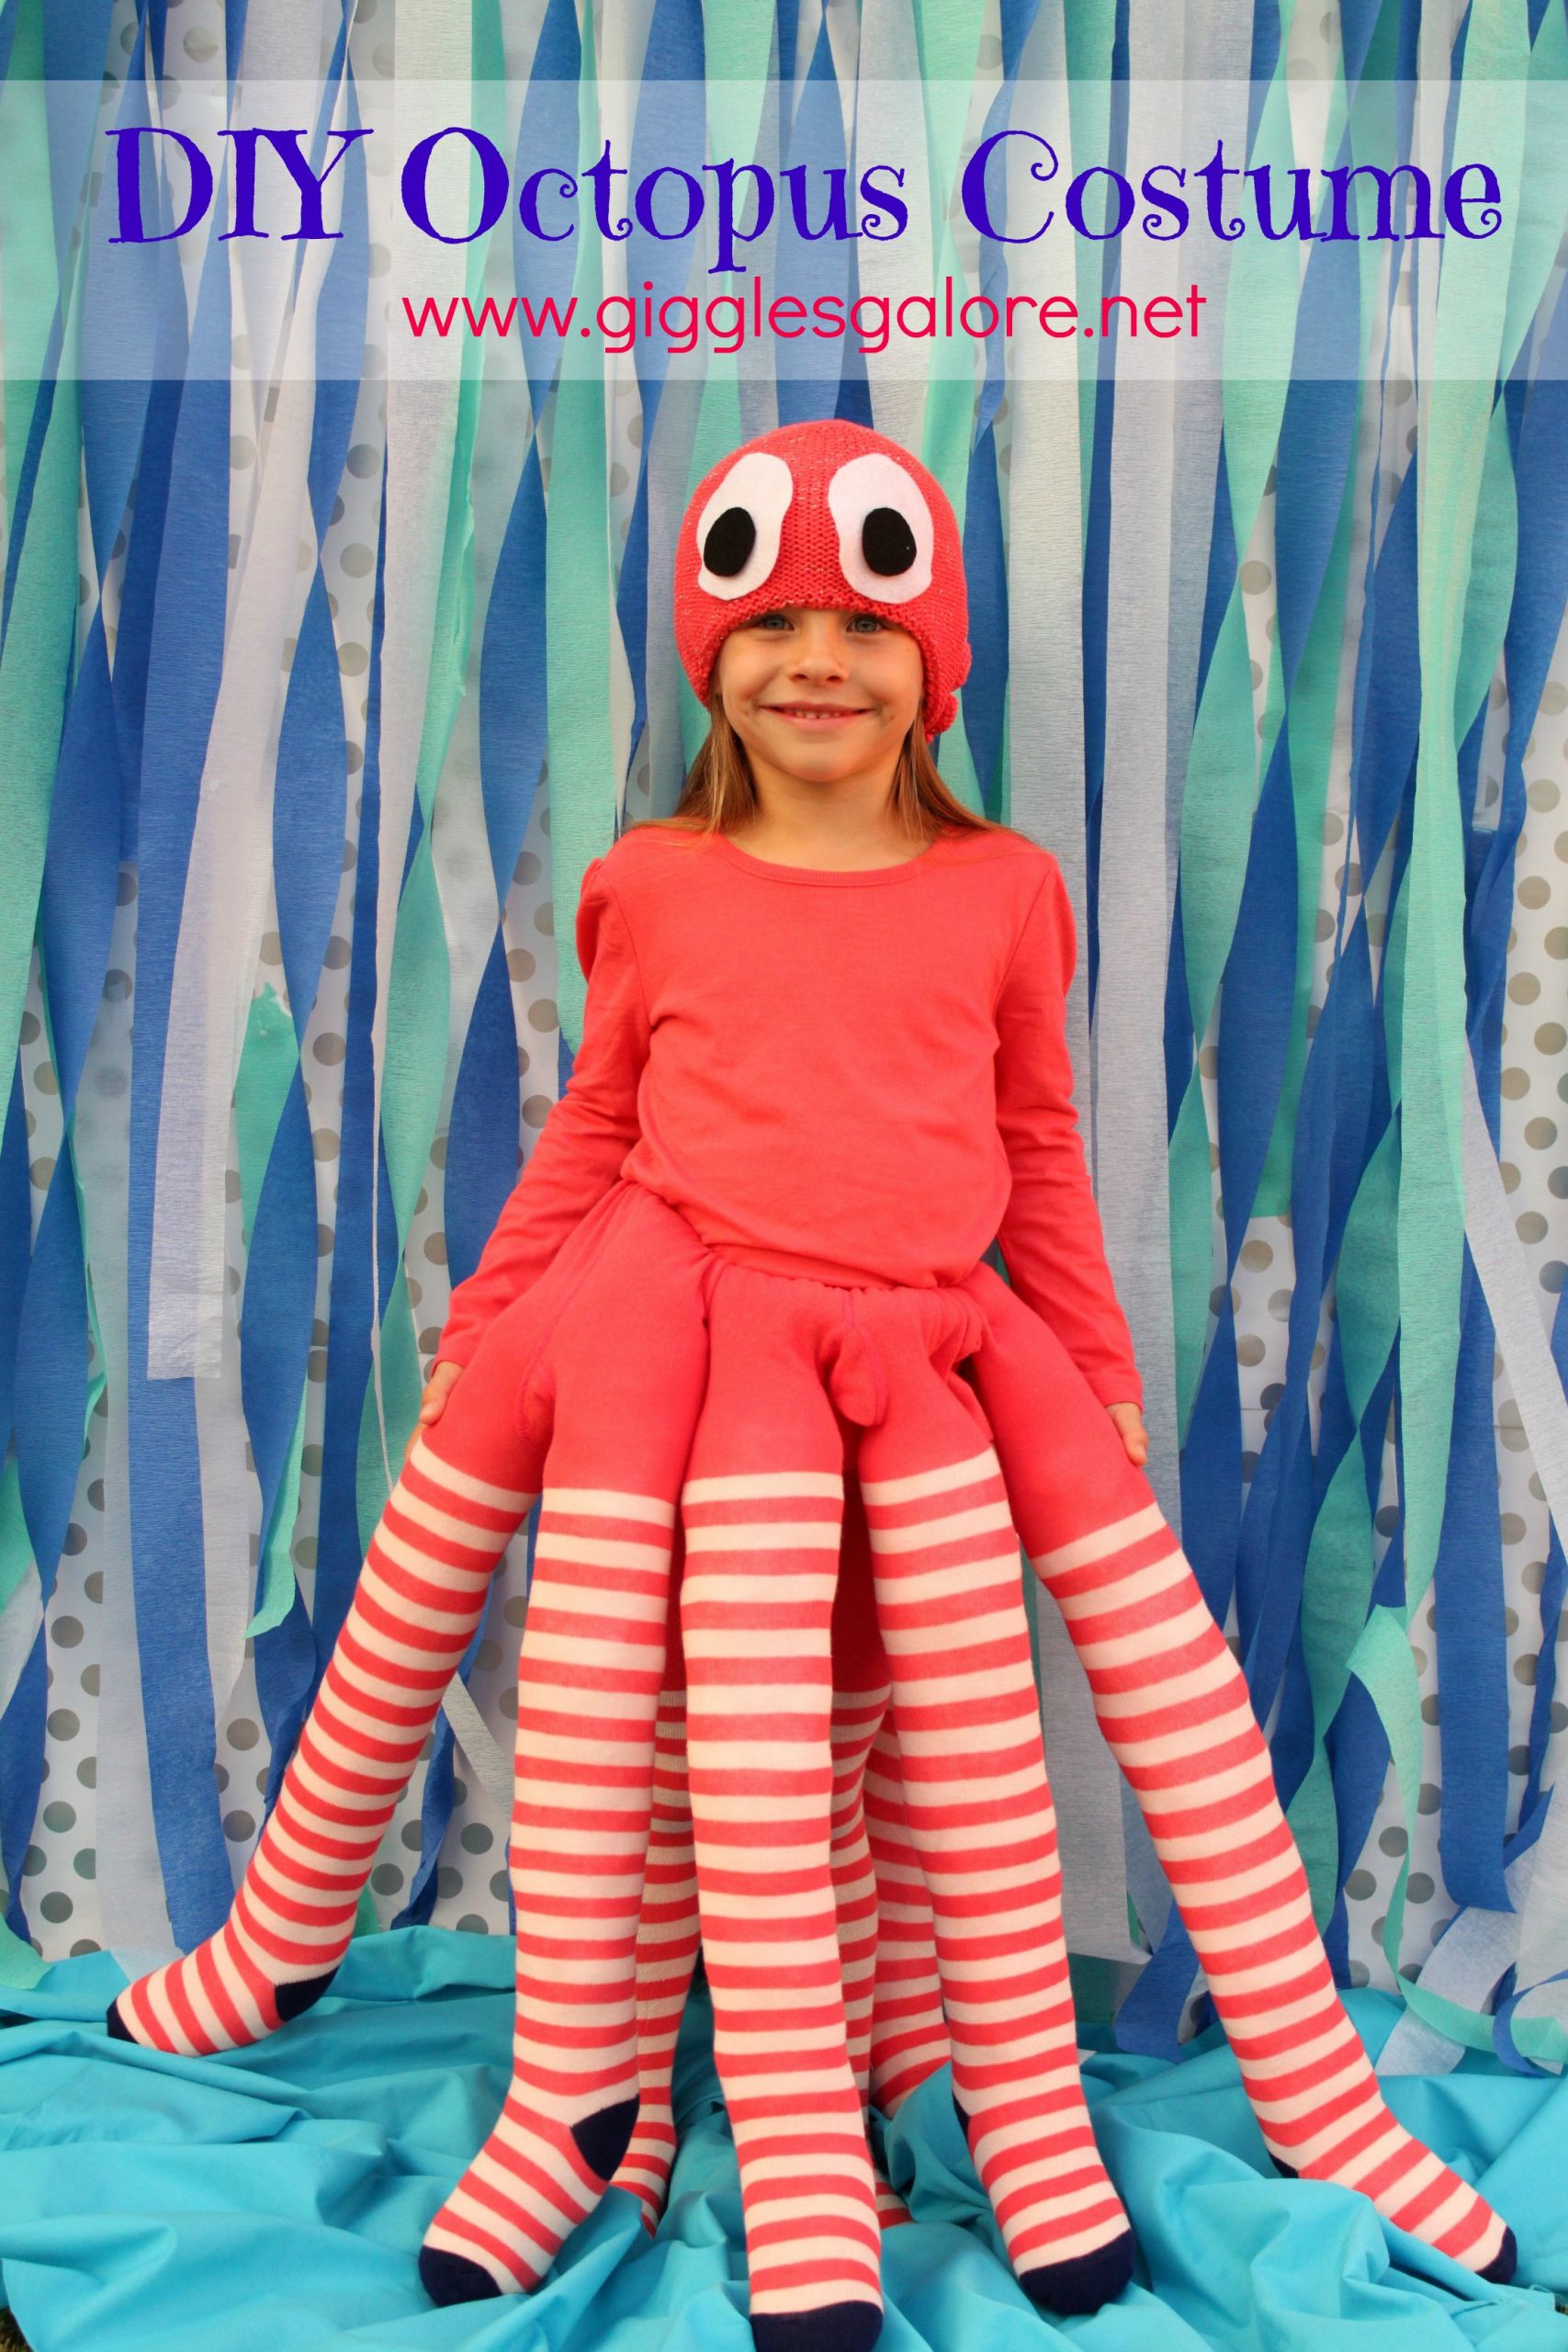 Toddler Costumes DIY
 Hot to Make a DIY Octopus Costume For Kids